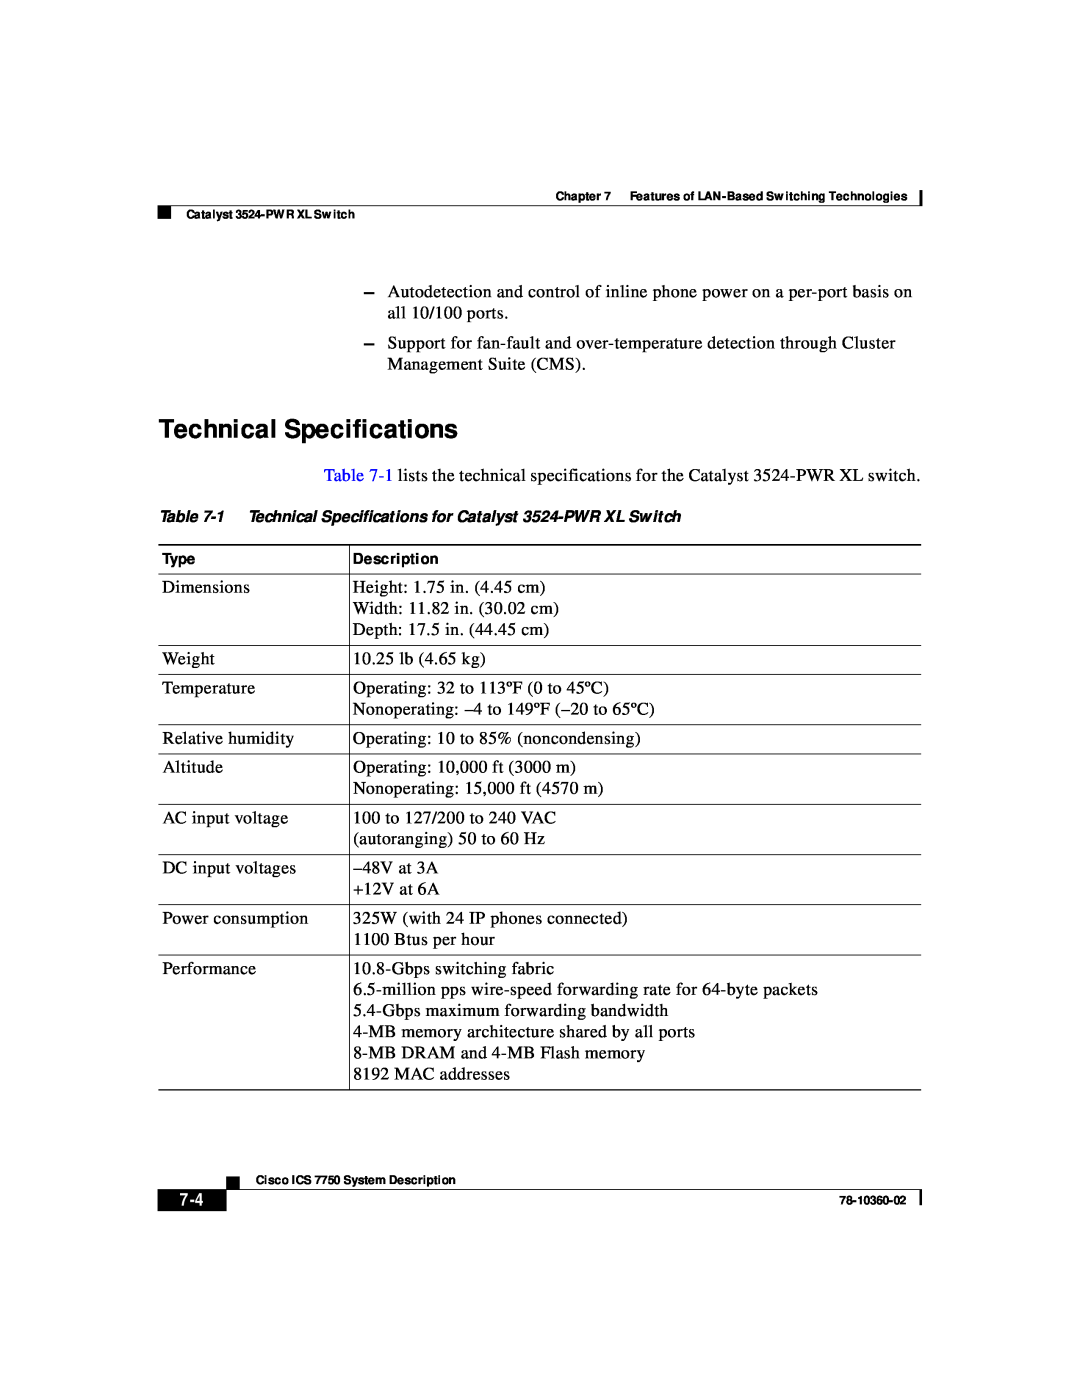 Cisco Systems ICS-7750 manual 1 Technical Specifications for Catalyst 3524-PWR XL Switch 